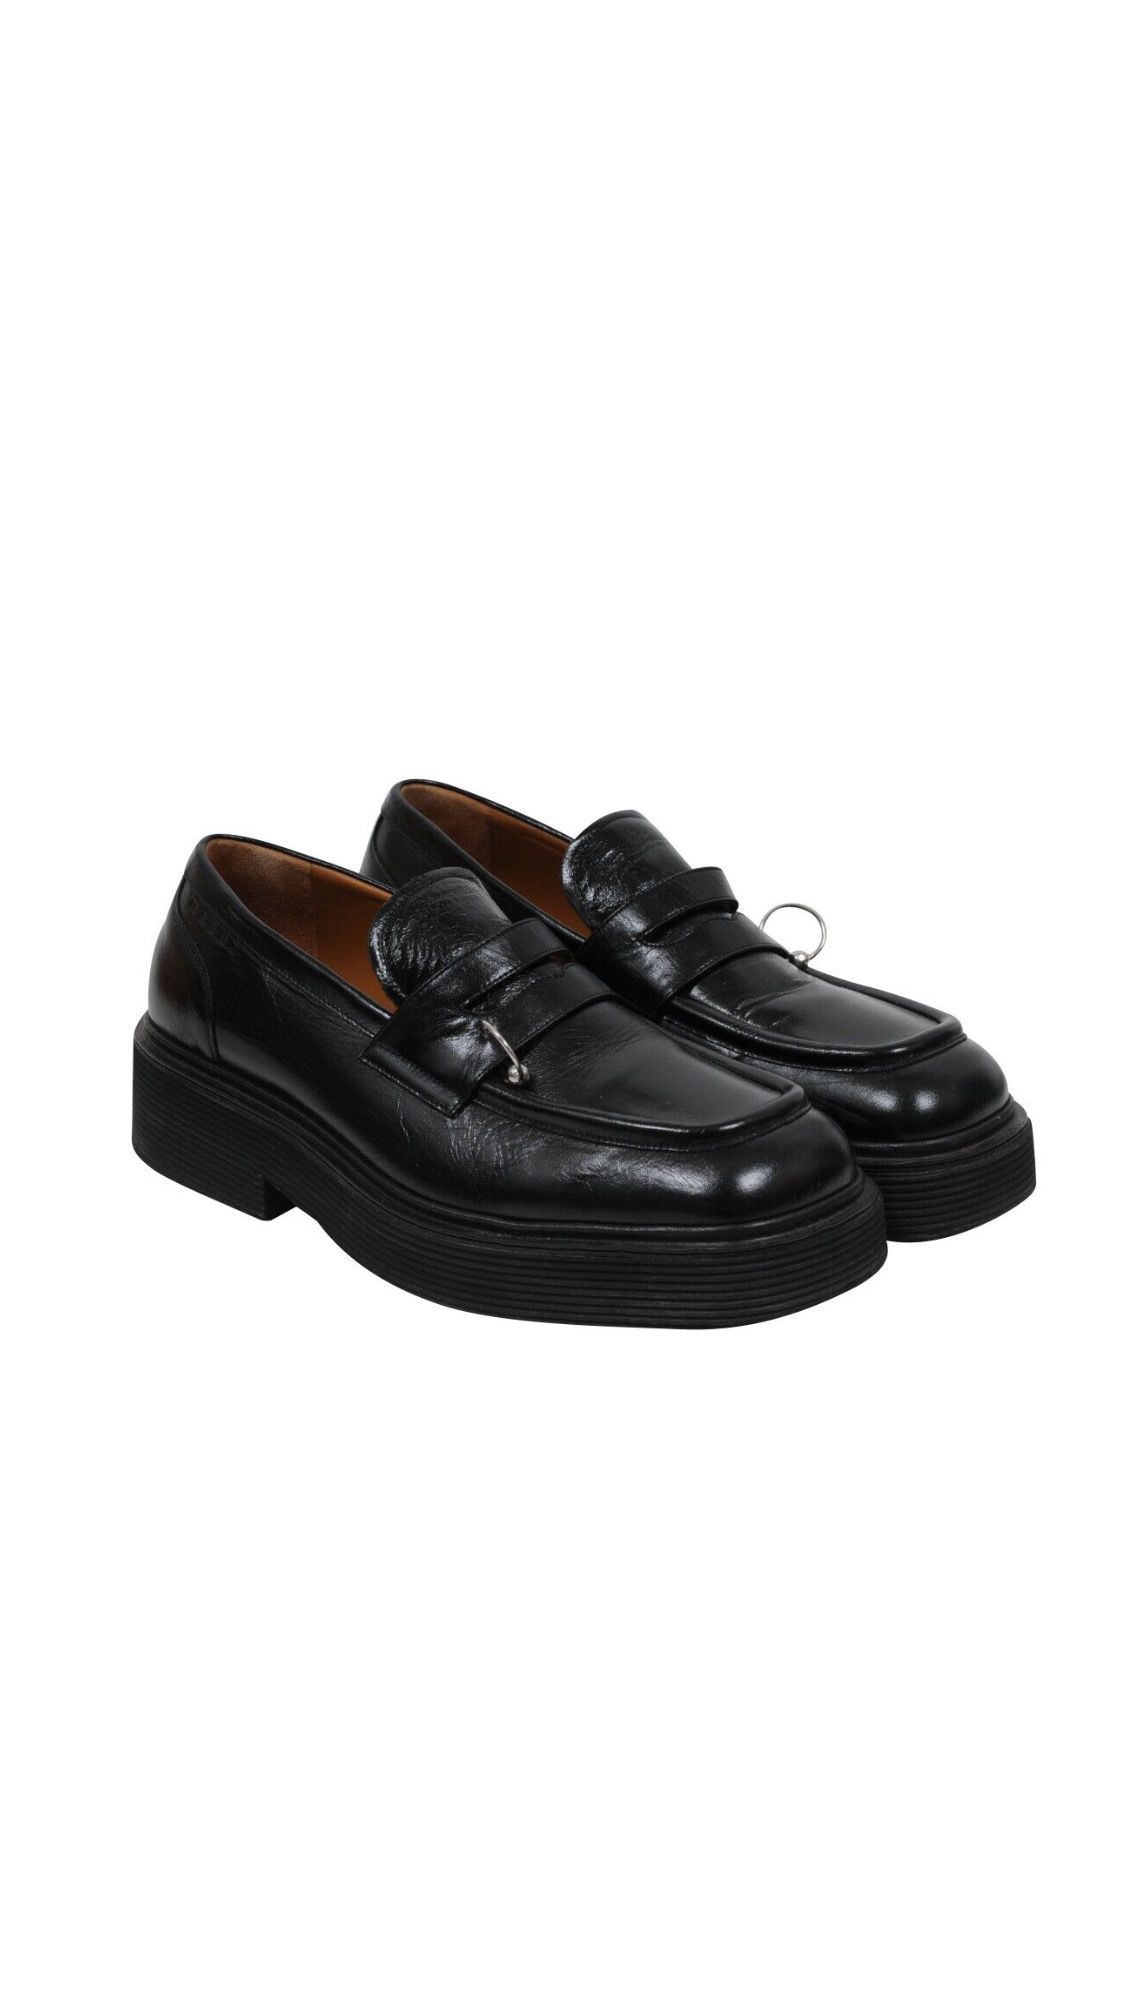 Pre-owned Marni Square Toe Platform Loafers Black Leather - 01920